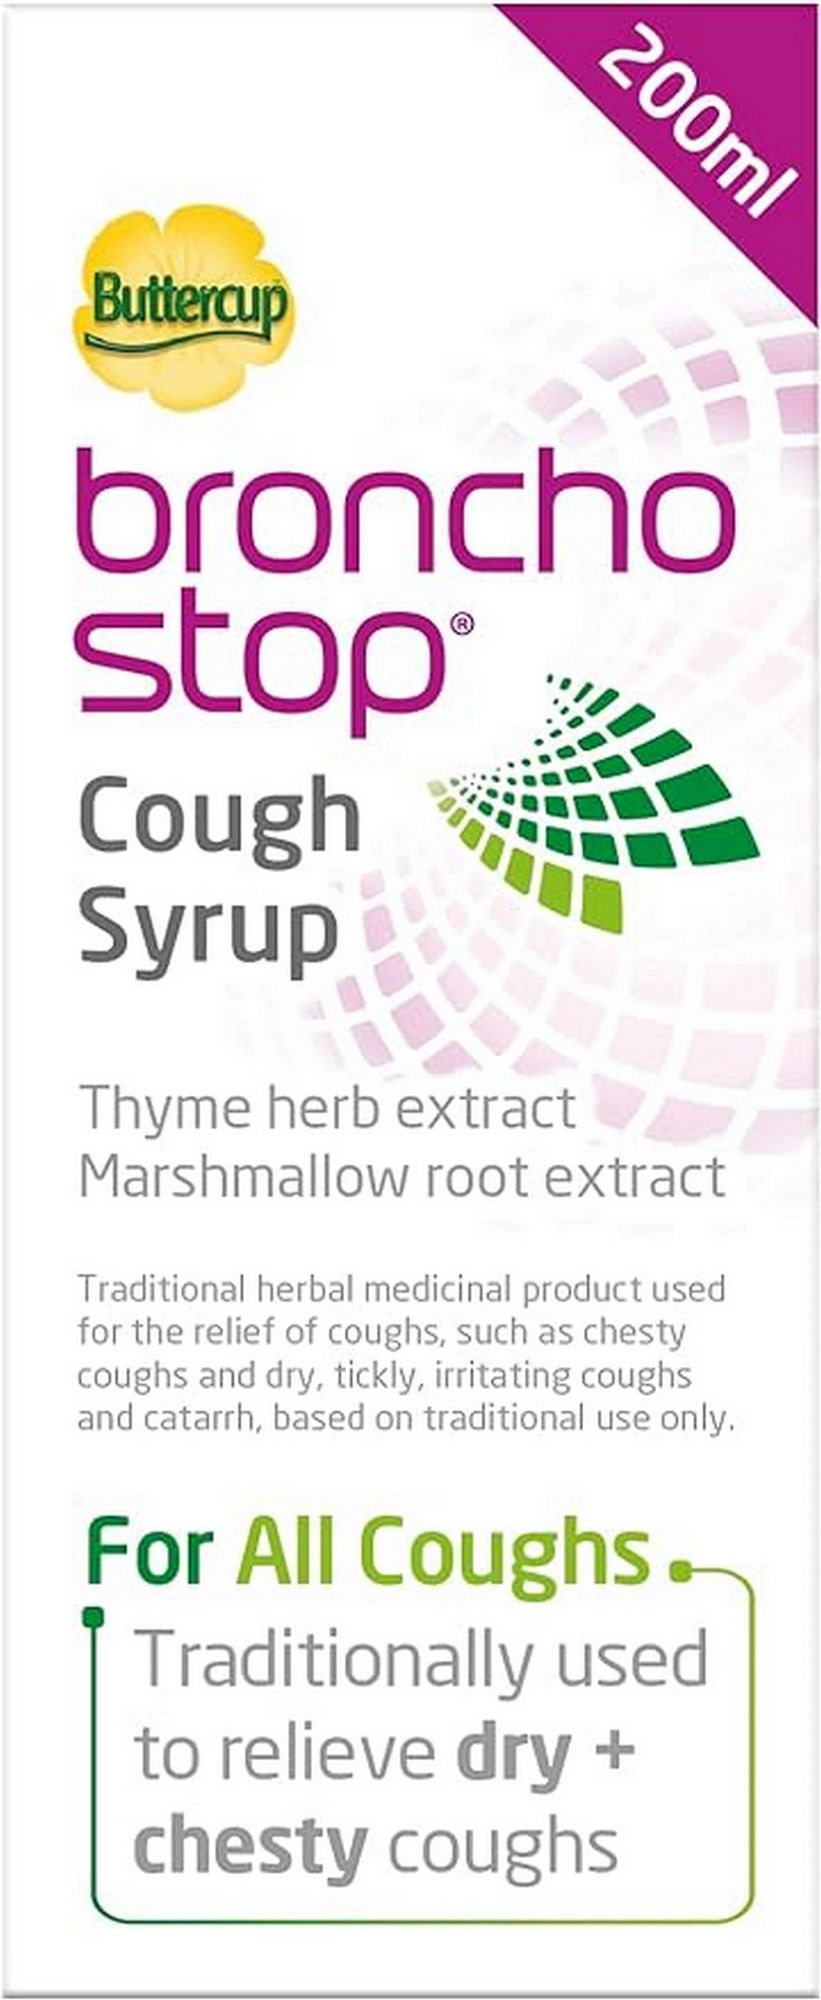 Bronchostop Cough Syrup - Used to Relieve Any Type of Cough - 200ml